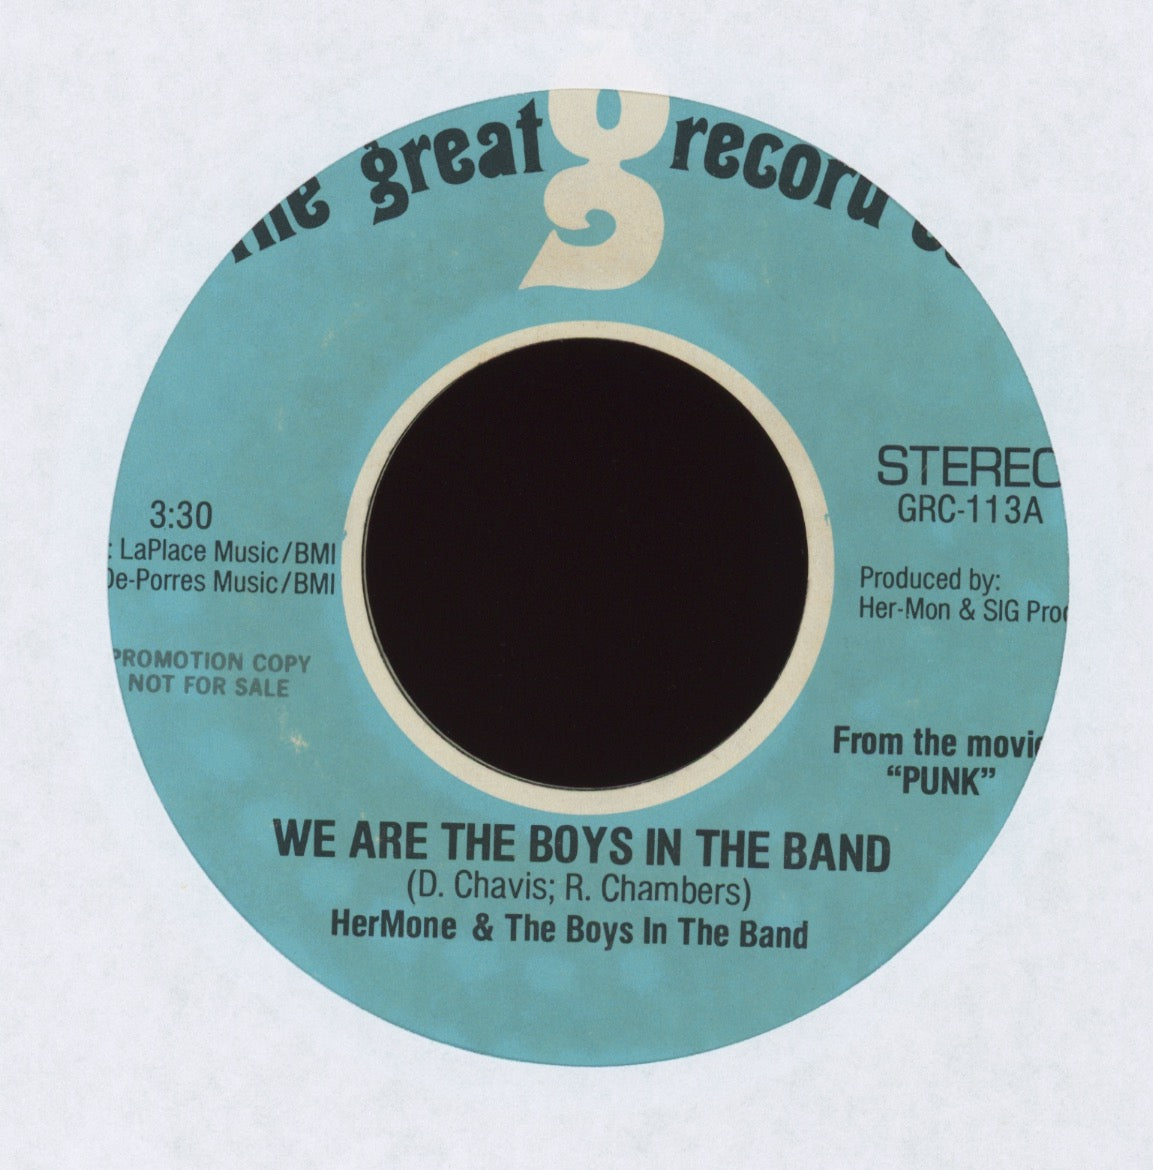 Hermone & The Boys in The Band- We Are The Boys In The Band on The Great Record Co